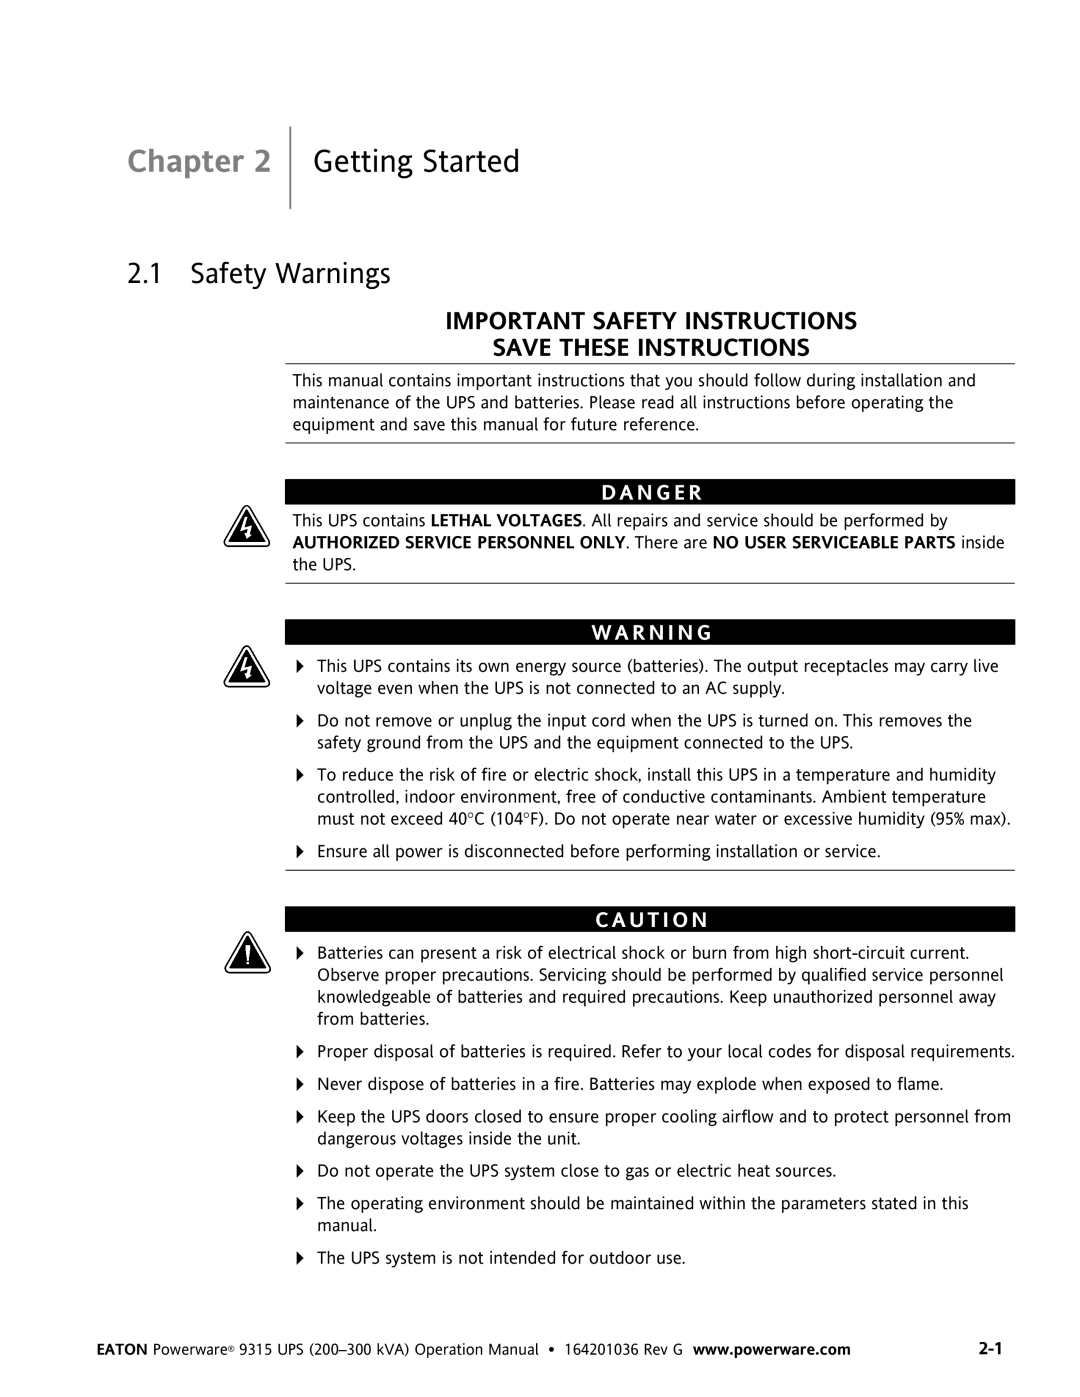 Powerware 9315 UPS operation manual Getting Started, Safety Warnings 